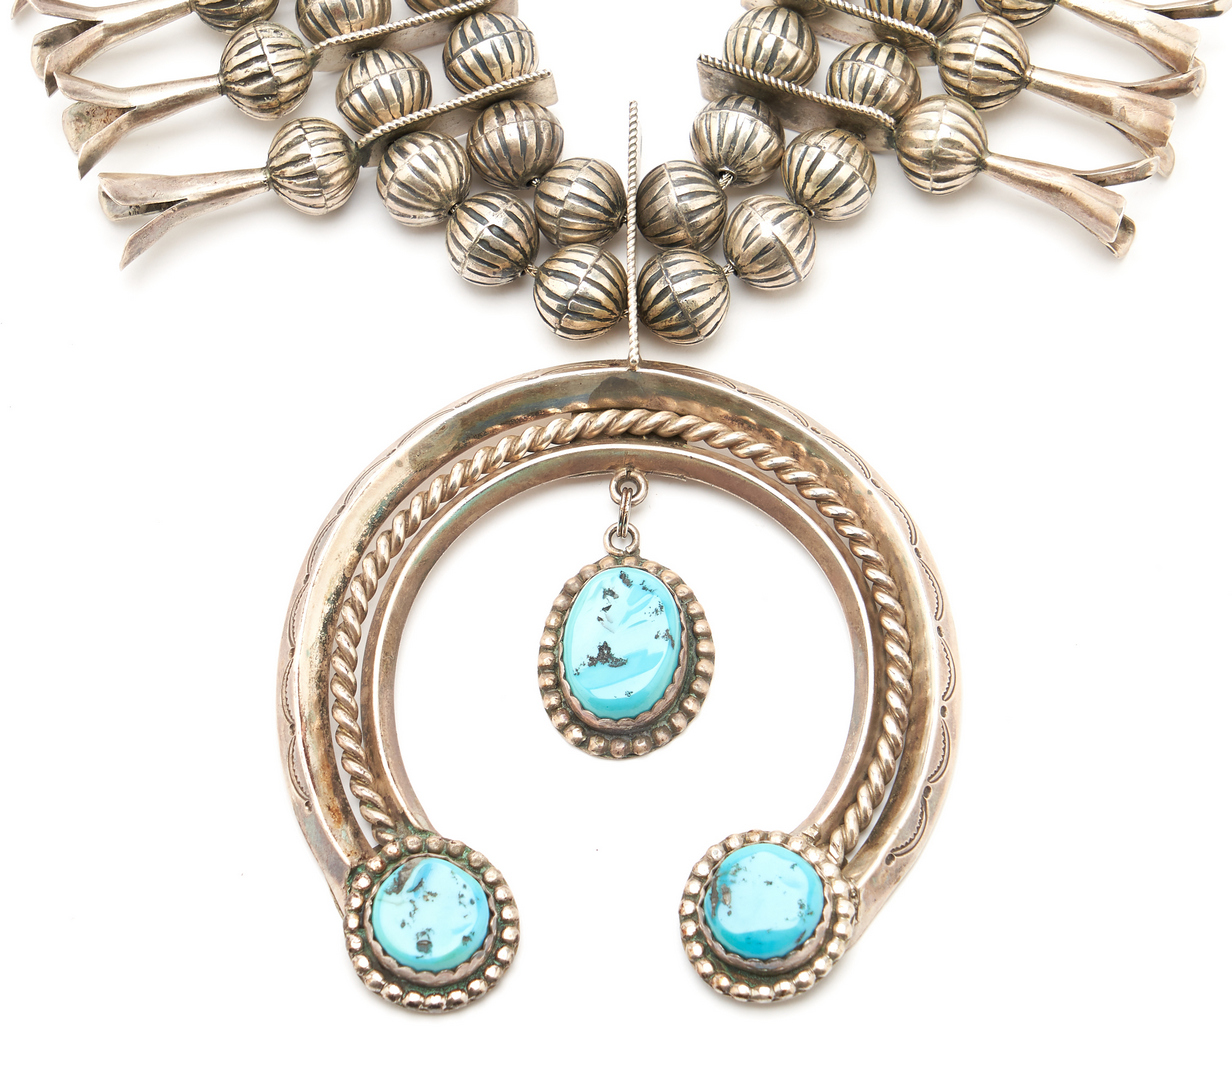 Lot 1083: 4 Pcs. Native American Navajo Turquoise & Silver Jewelry